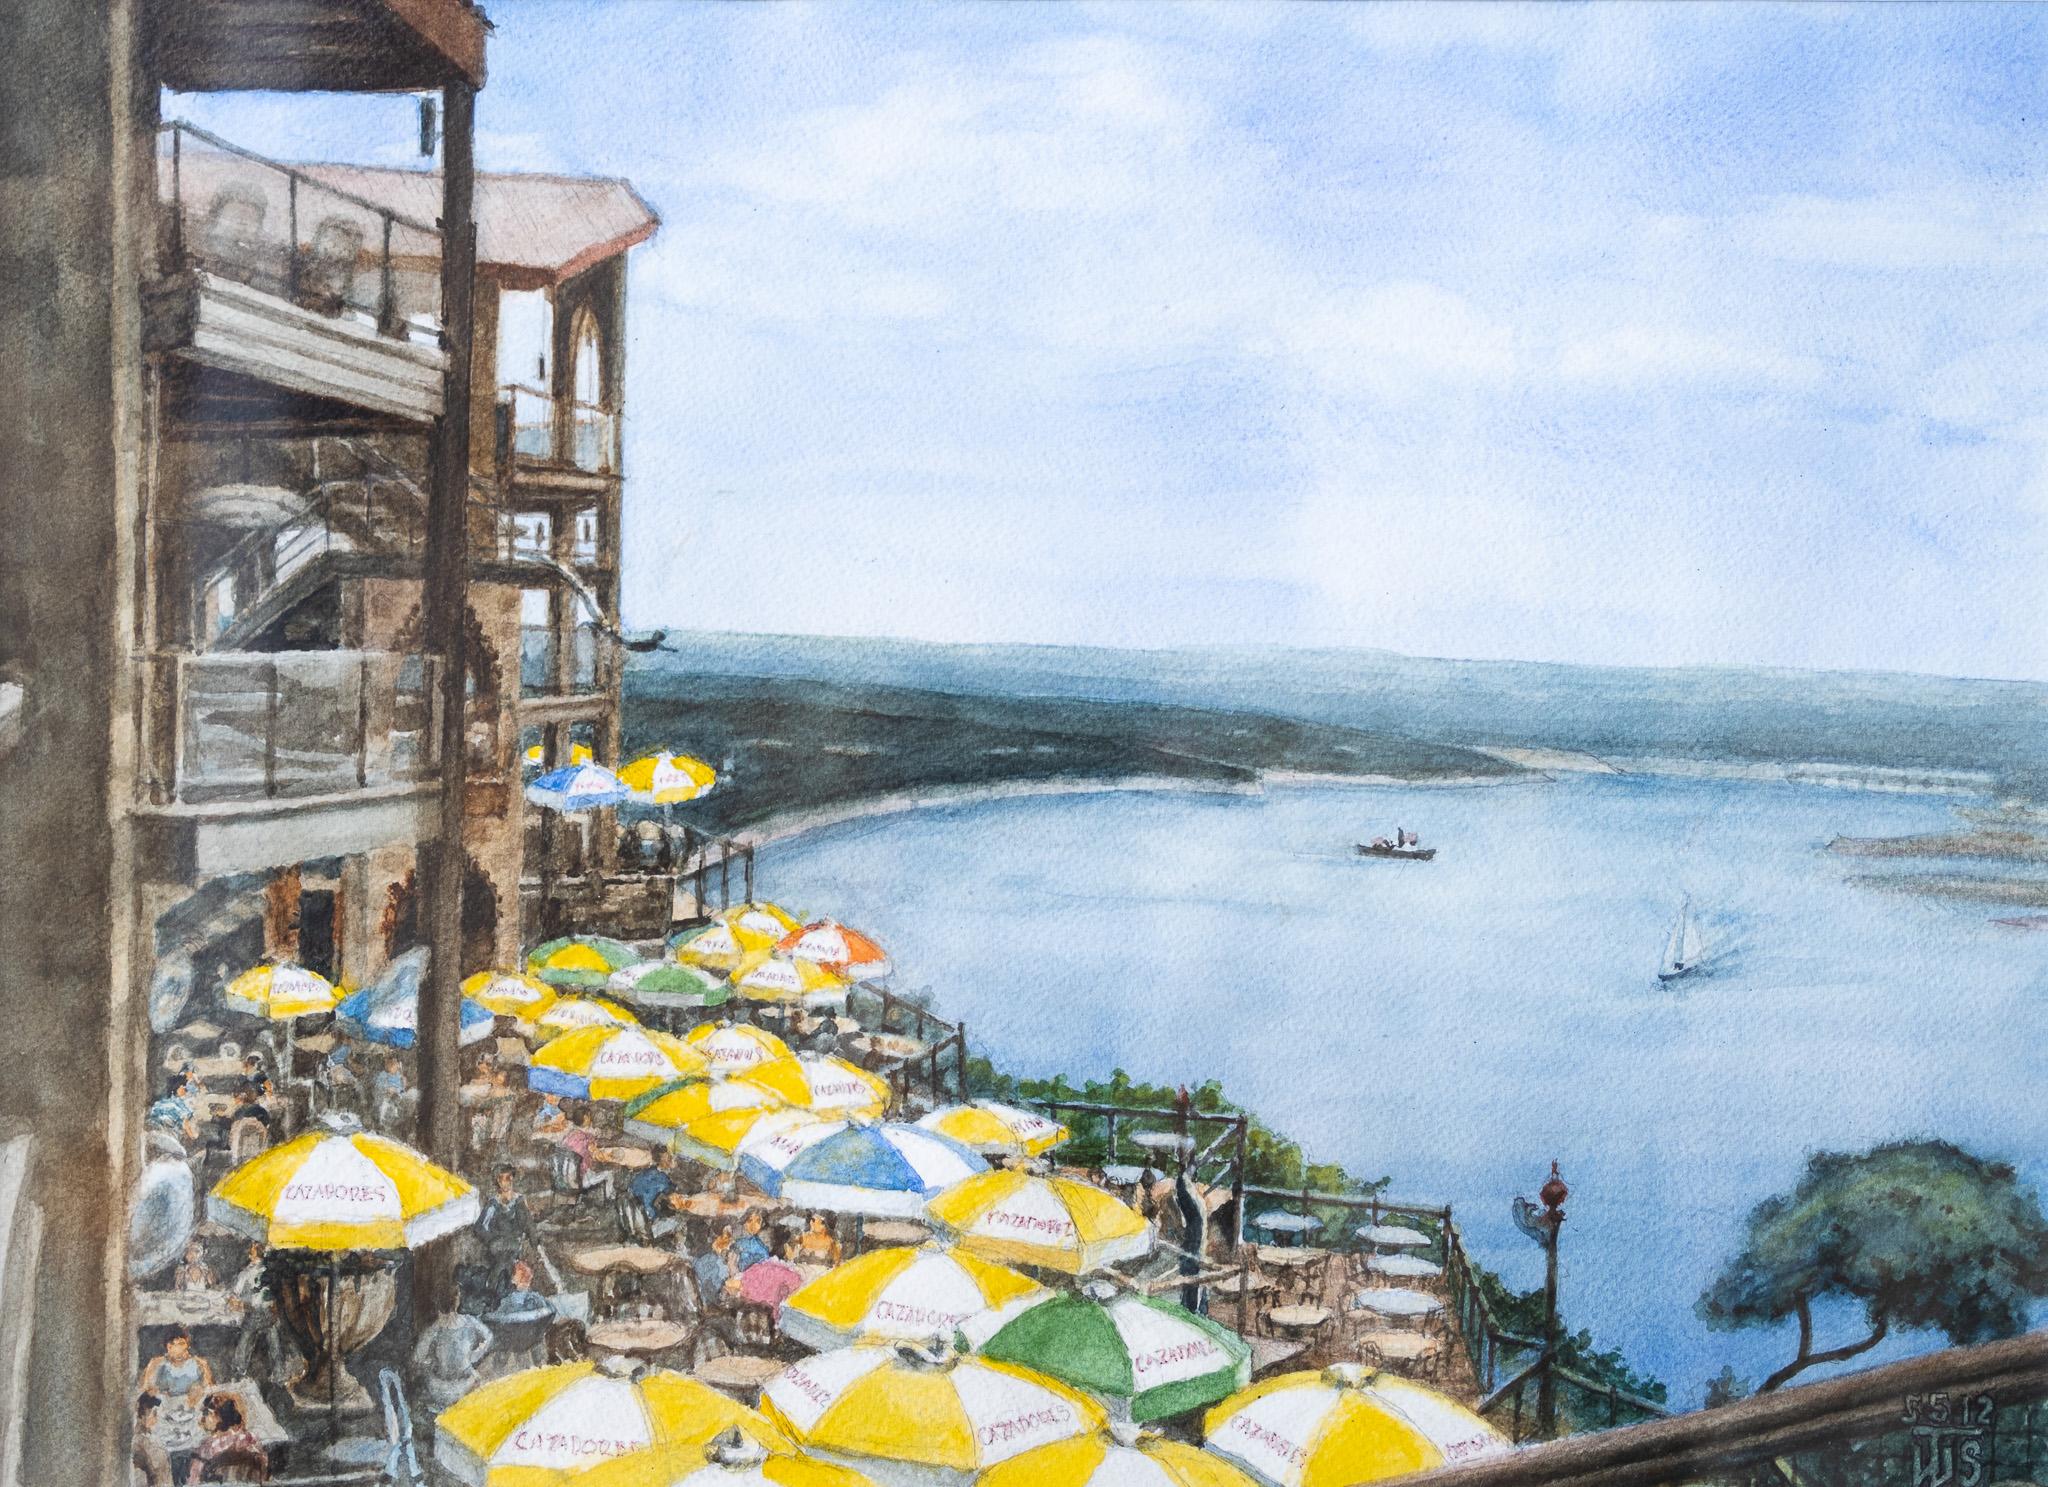 Tom Shefelman Landscape Painting - "Lunch on the Lake" Watercolor Landscape of Lake Travis in Austin, Texas